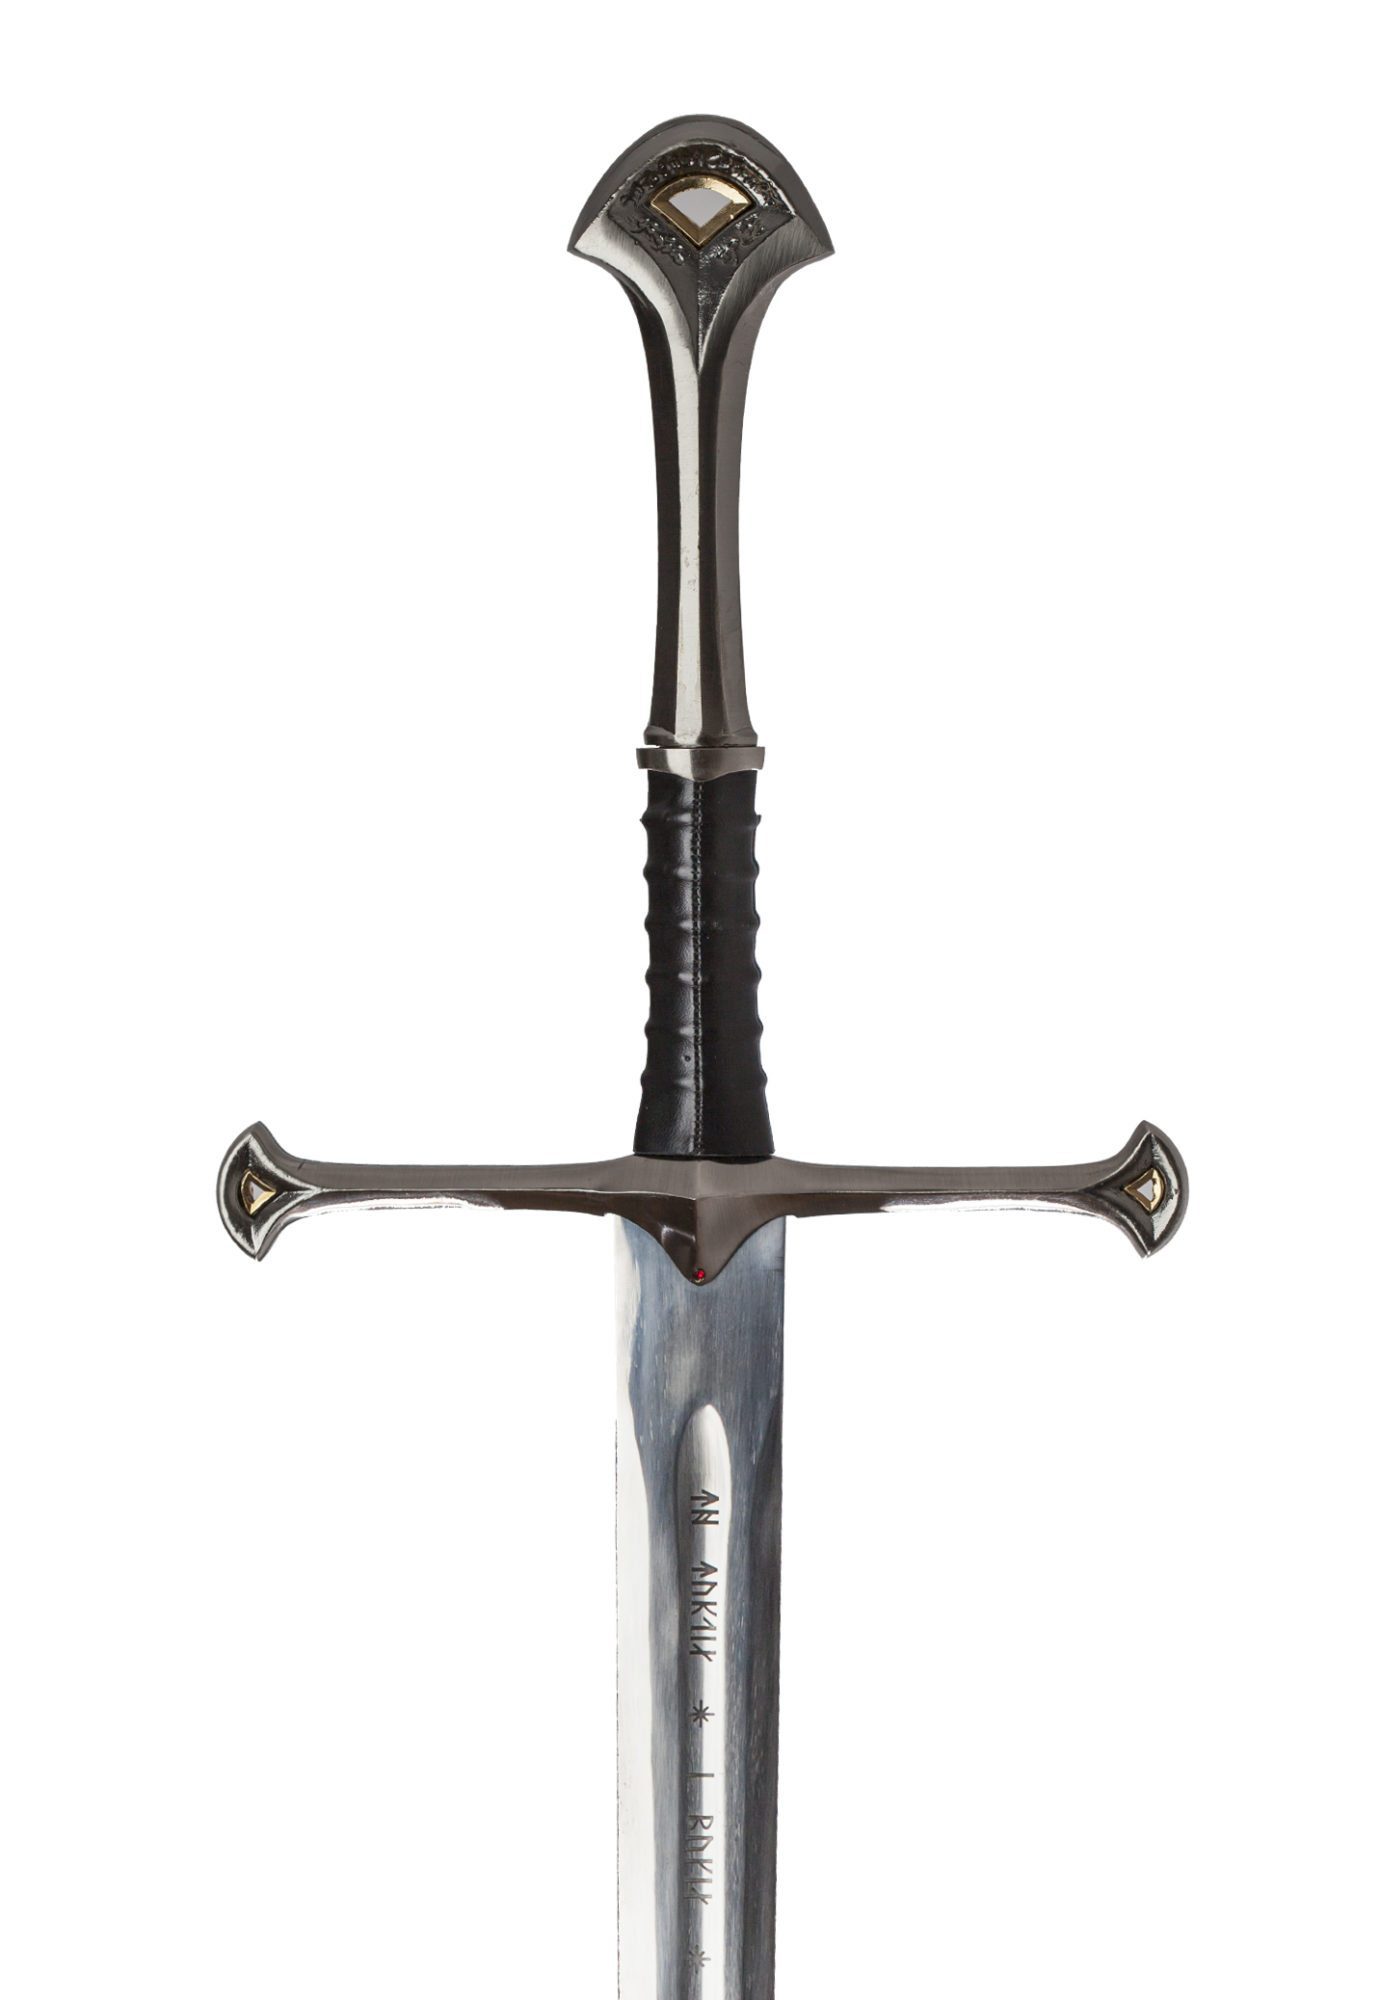 lord of the rings sword of elendil